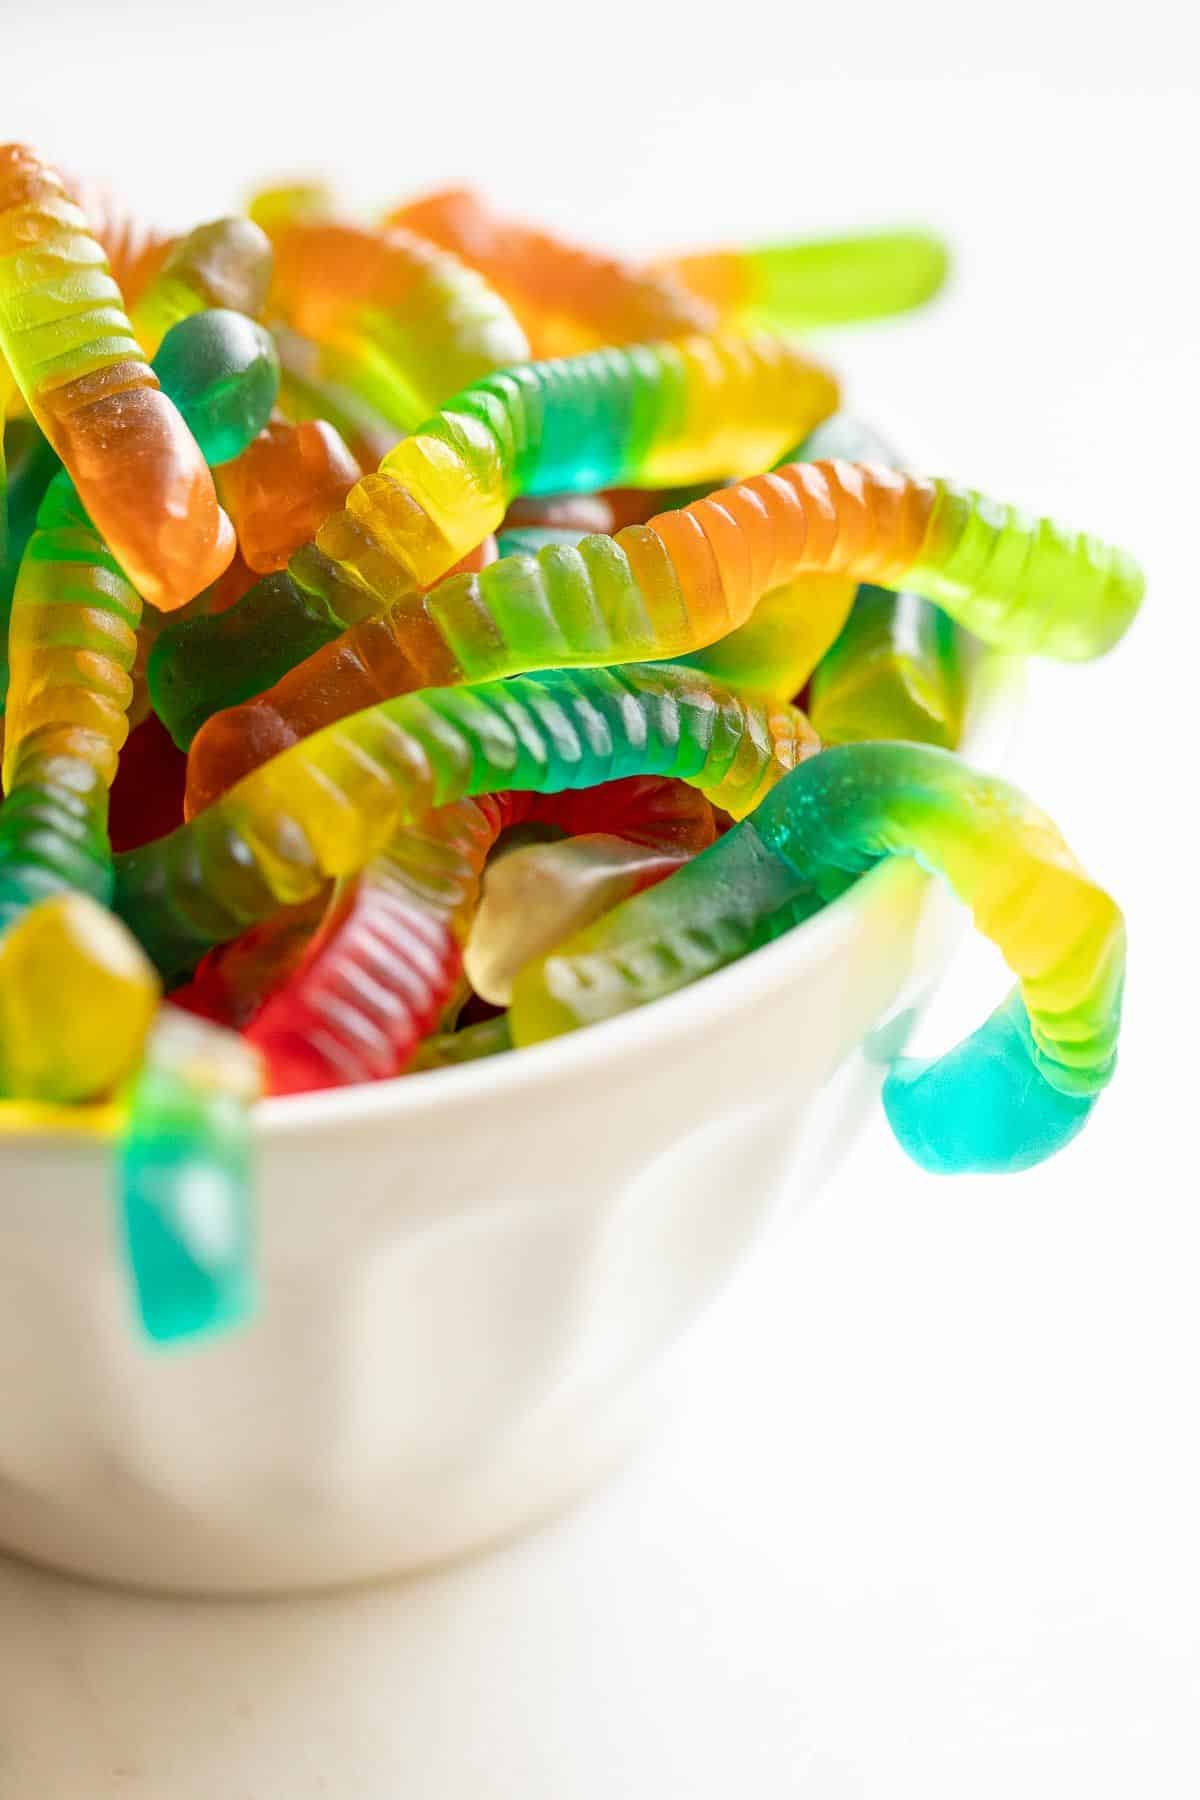 A white bowl full of gummy worms for a Halloween outdoor movie night.